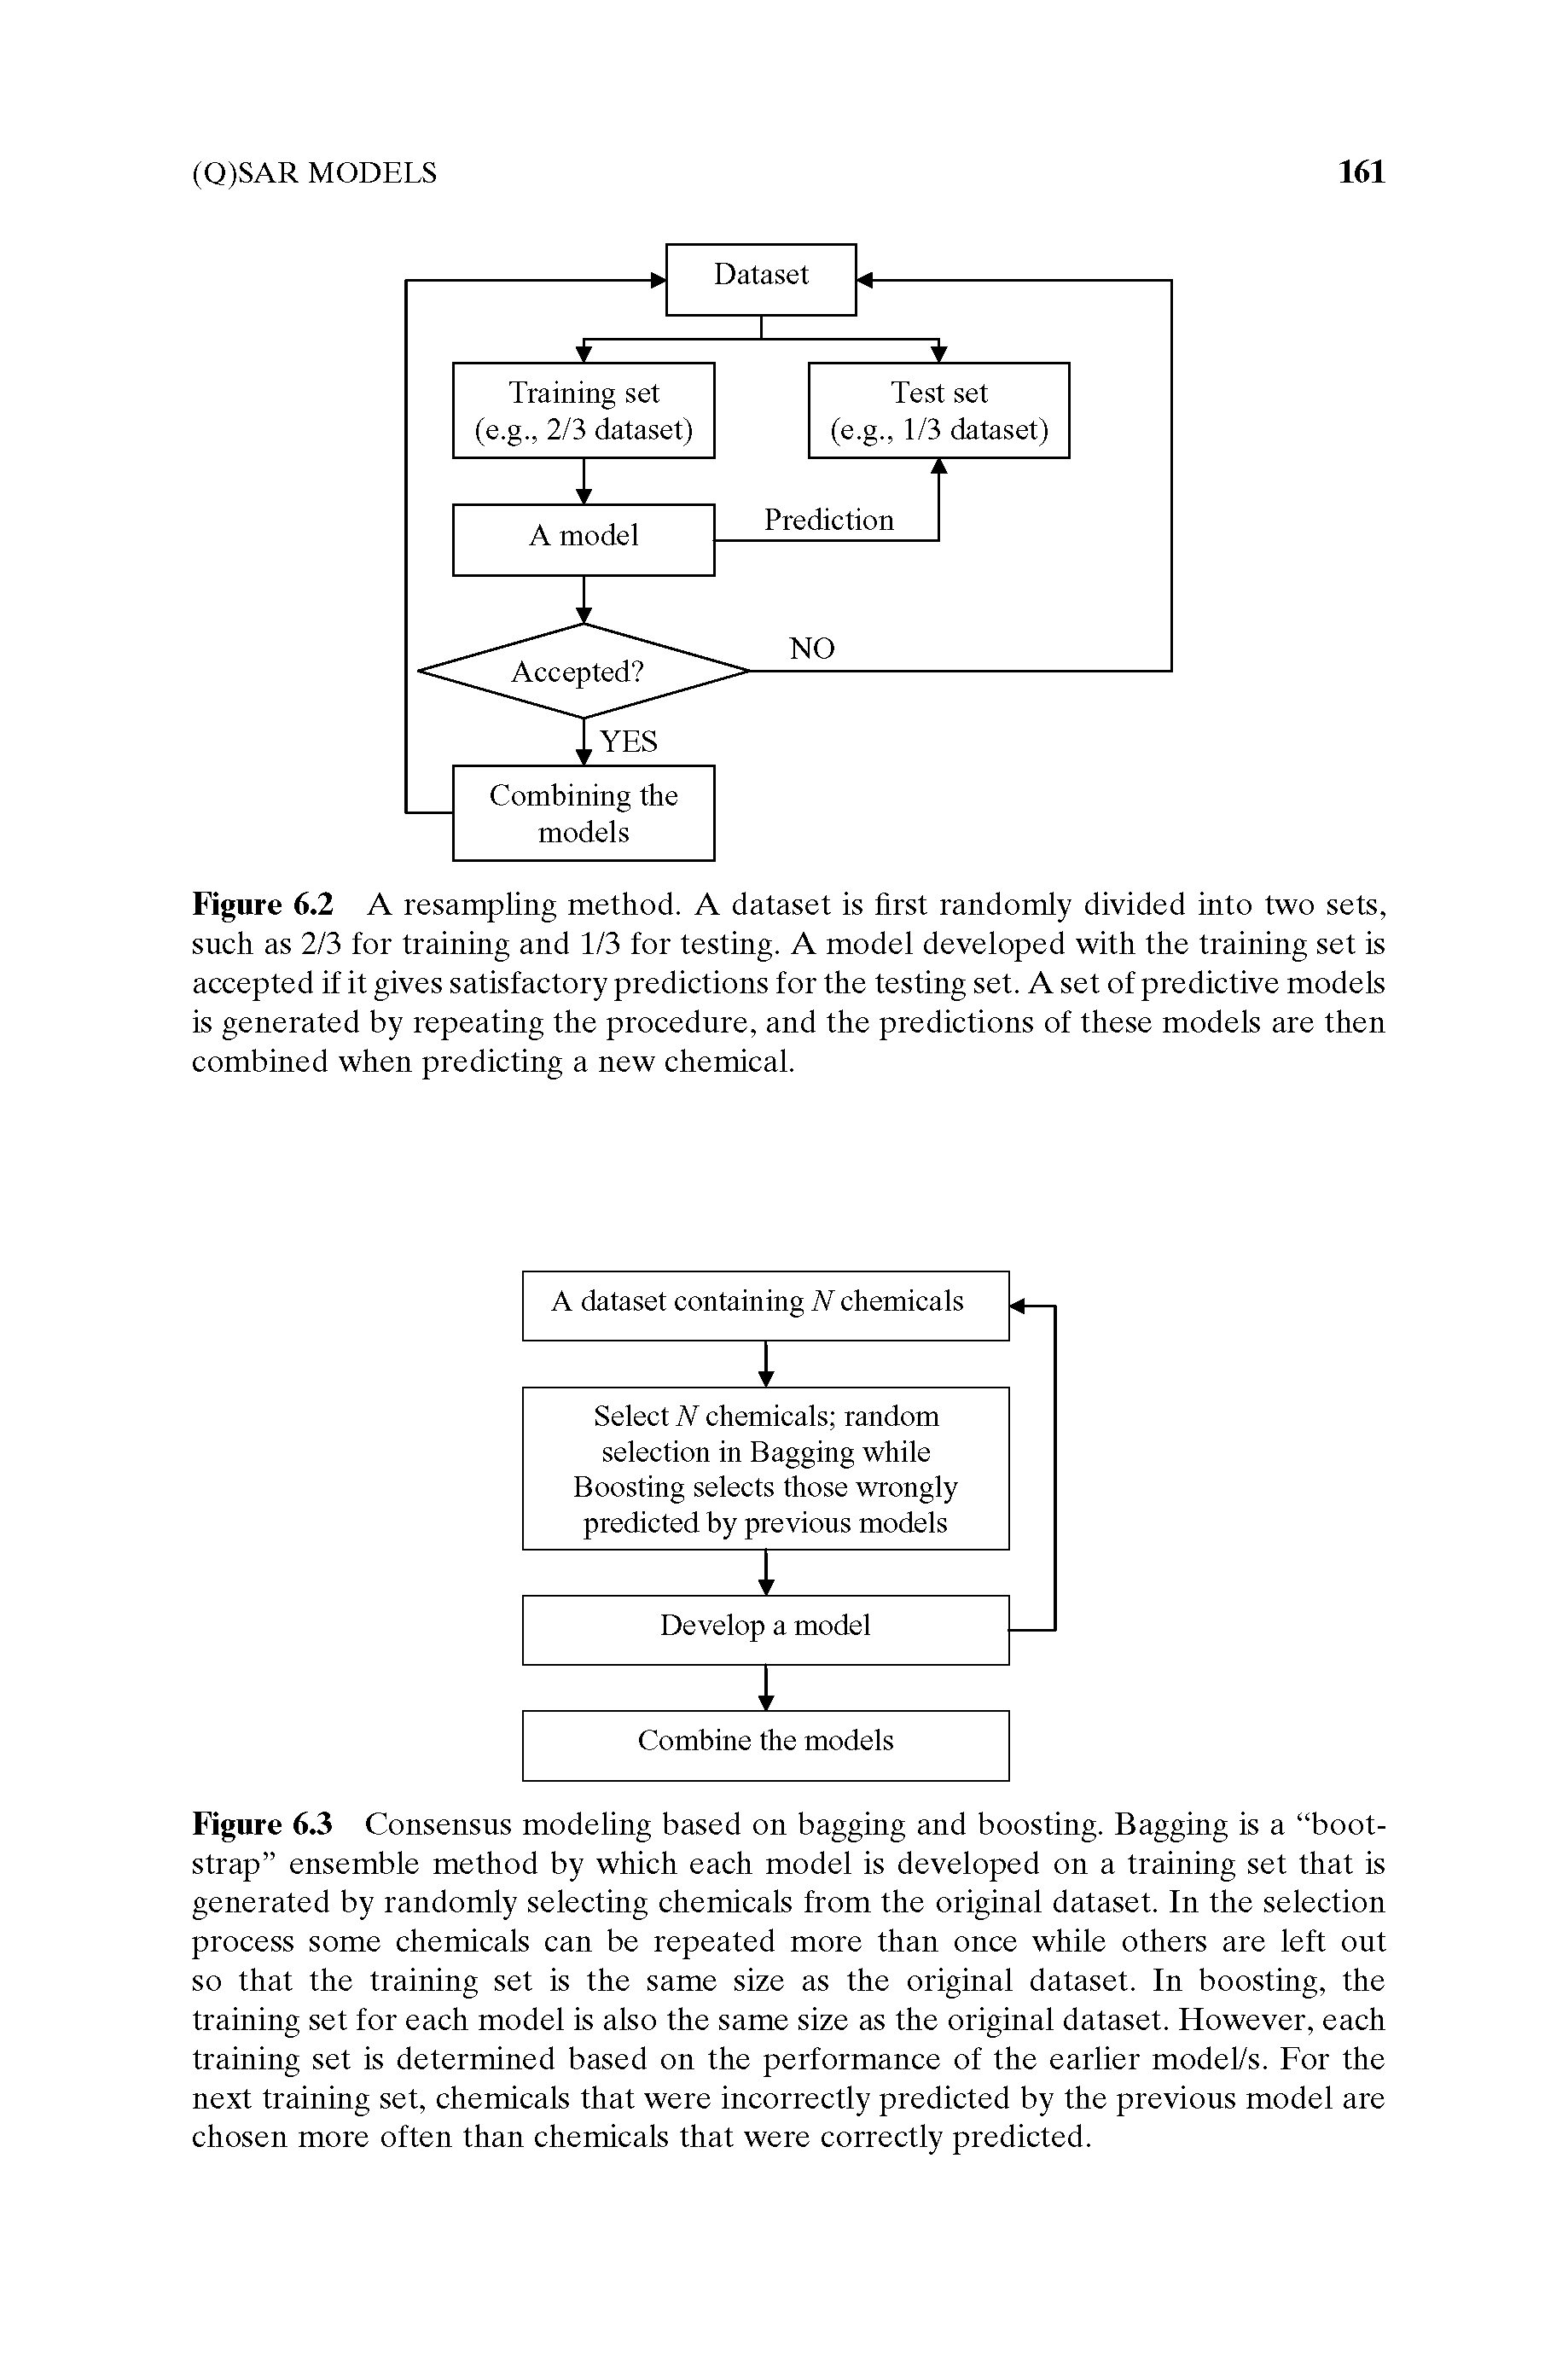 Figure 6.2 A resampling method. A dataset is first randomly divided into two sets, such as 2/3 for training and 1/3 for testing. A model developed with the training set is accepted if it gives satisfactory predictions for the testing set. A set of predictive models is generated by repeating the procedure, and the predictions of these models are then combined when predicting a new chemical.